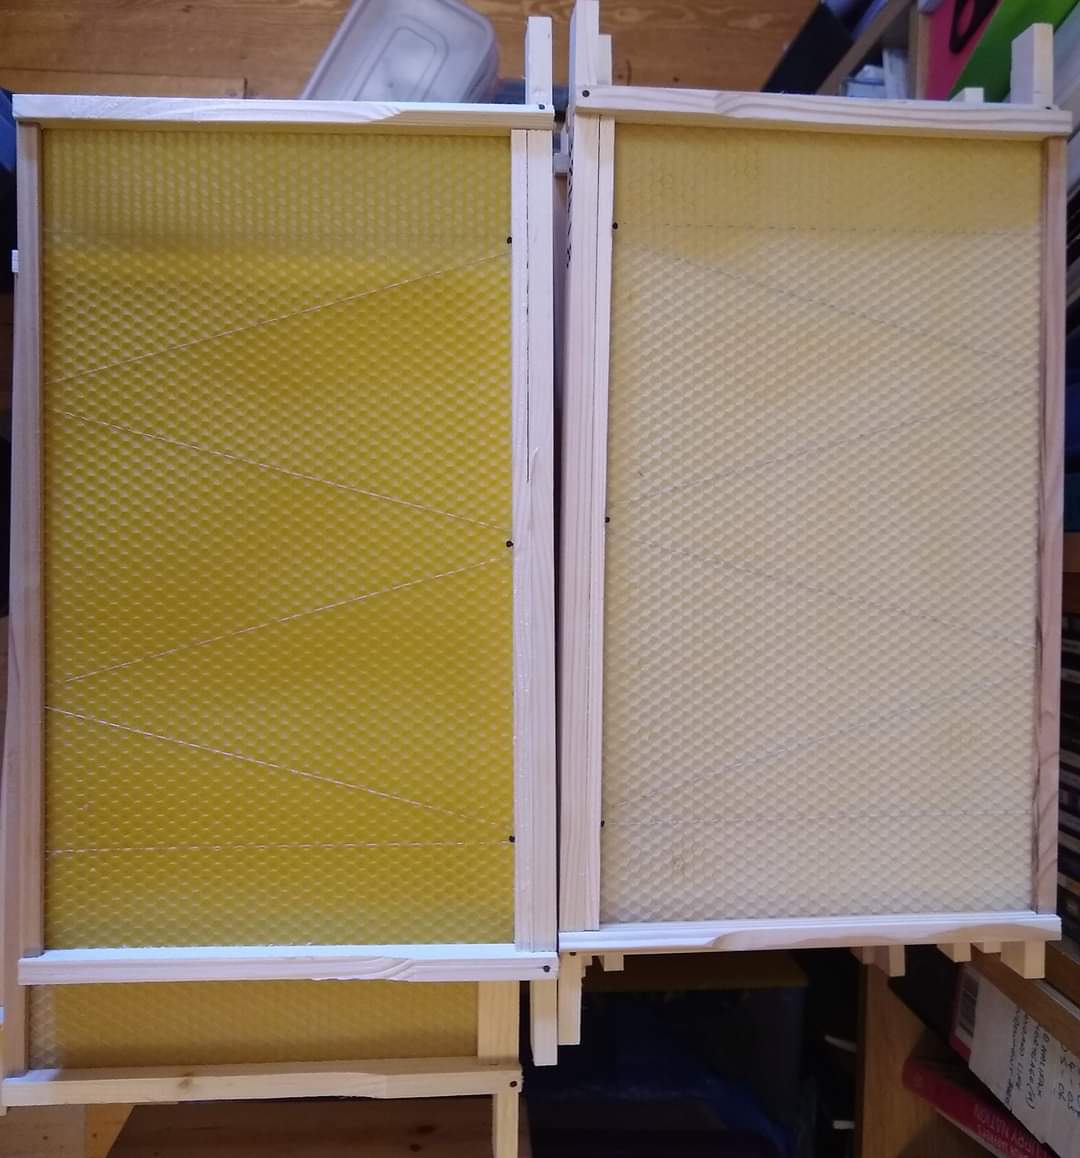 When adding foundation to frames, older or stored sheets can have a whitish tinge (right). Bees seem less inclined to draw this out. Gently warming with a hairdryer restores colour and aroma (left) and the bees seem to prefer.